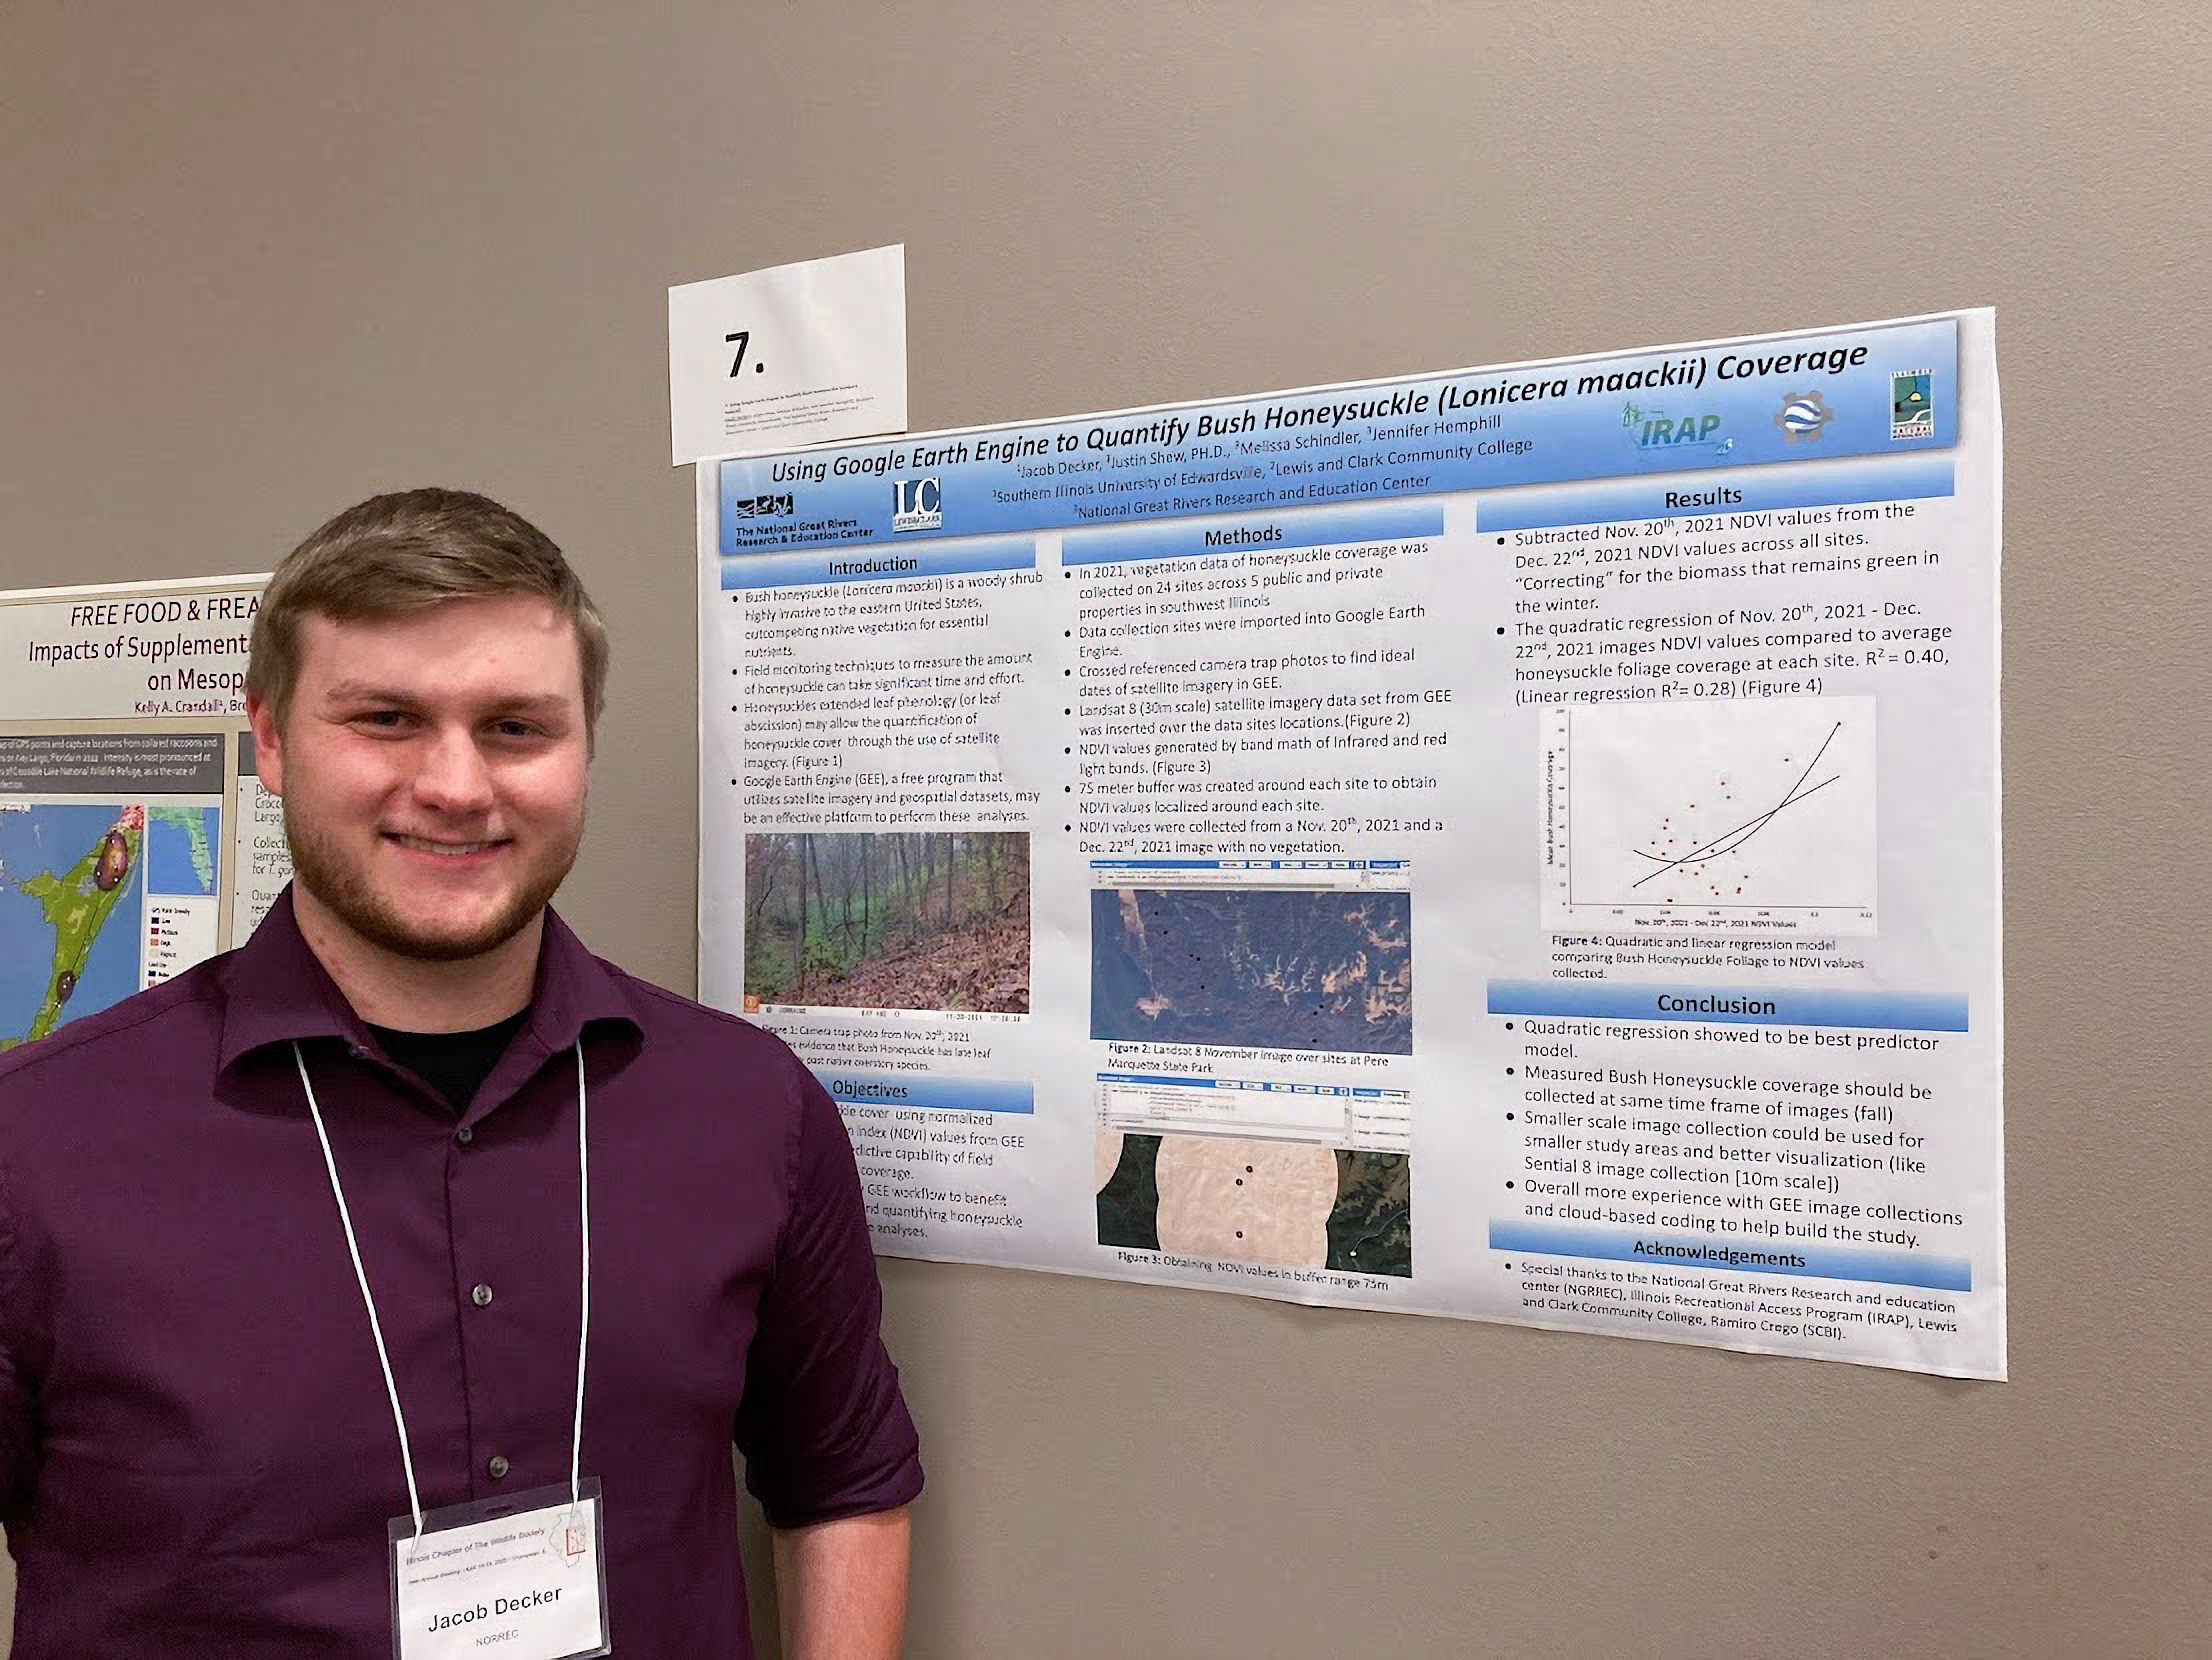 Jacob Decker, an L&C alumnus, former NGRREC Habitat Strike Team member and current NGRREC research intern, presented his Fall 2022 NGRREC research poster at the Annual Meeting of the Illinois Chapter of the Wildlife Society.